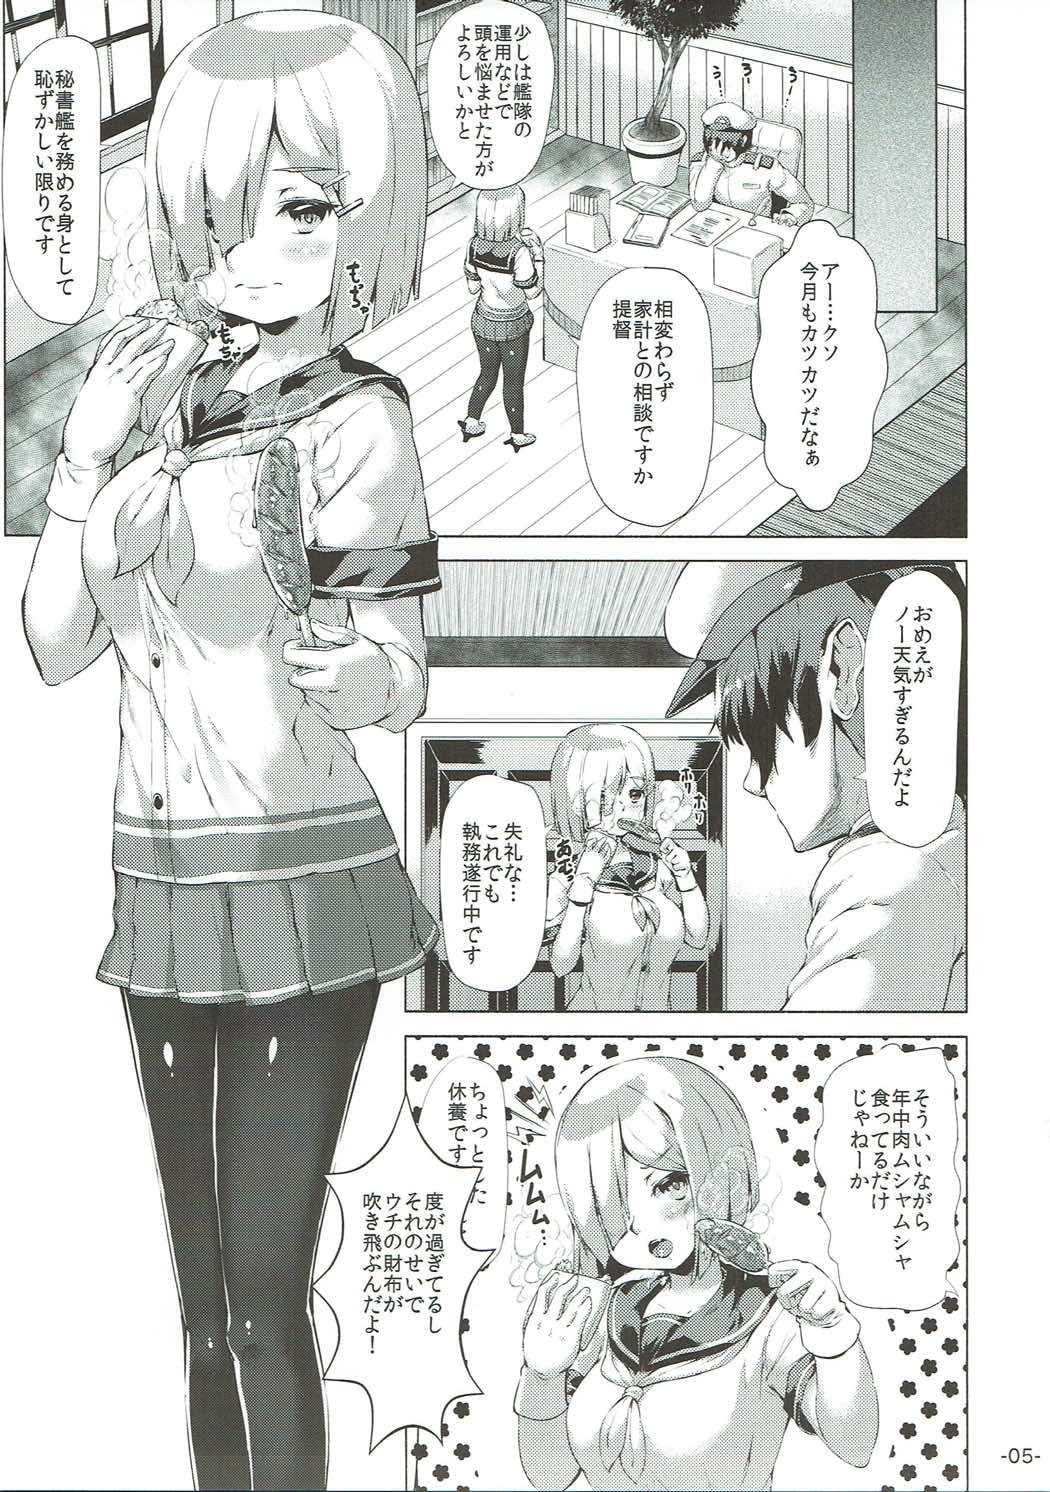 Best Blowjob Hamakaze Tabehoudai. - Kantai collection Threesome - Page 4